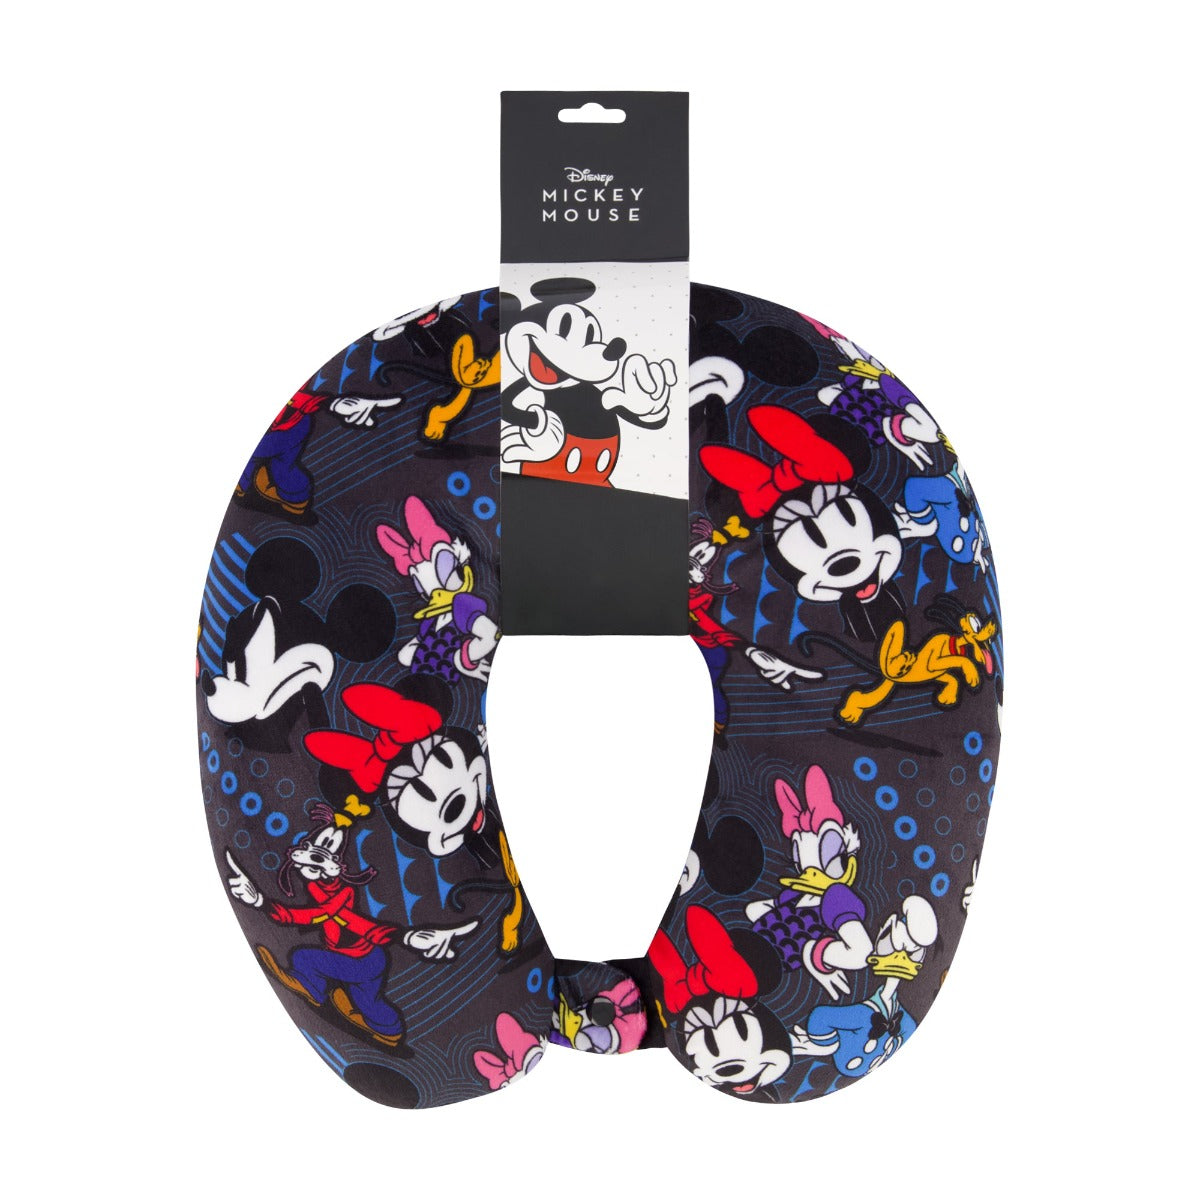 Ful Disney Mickey and friends AOP neck pillow black blue - best supportive travel neck pillows for kids 